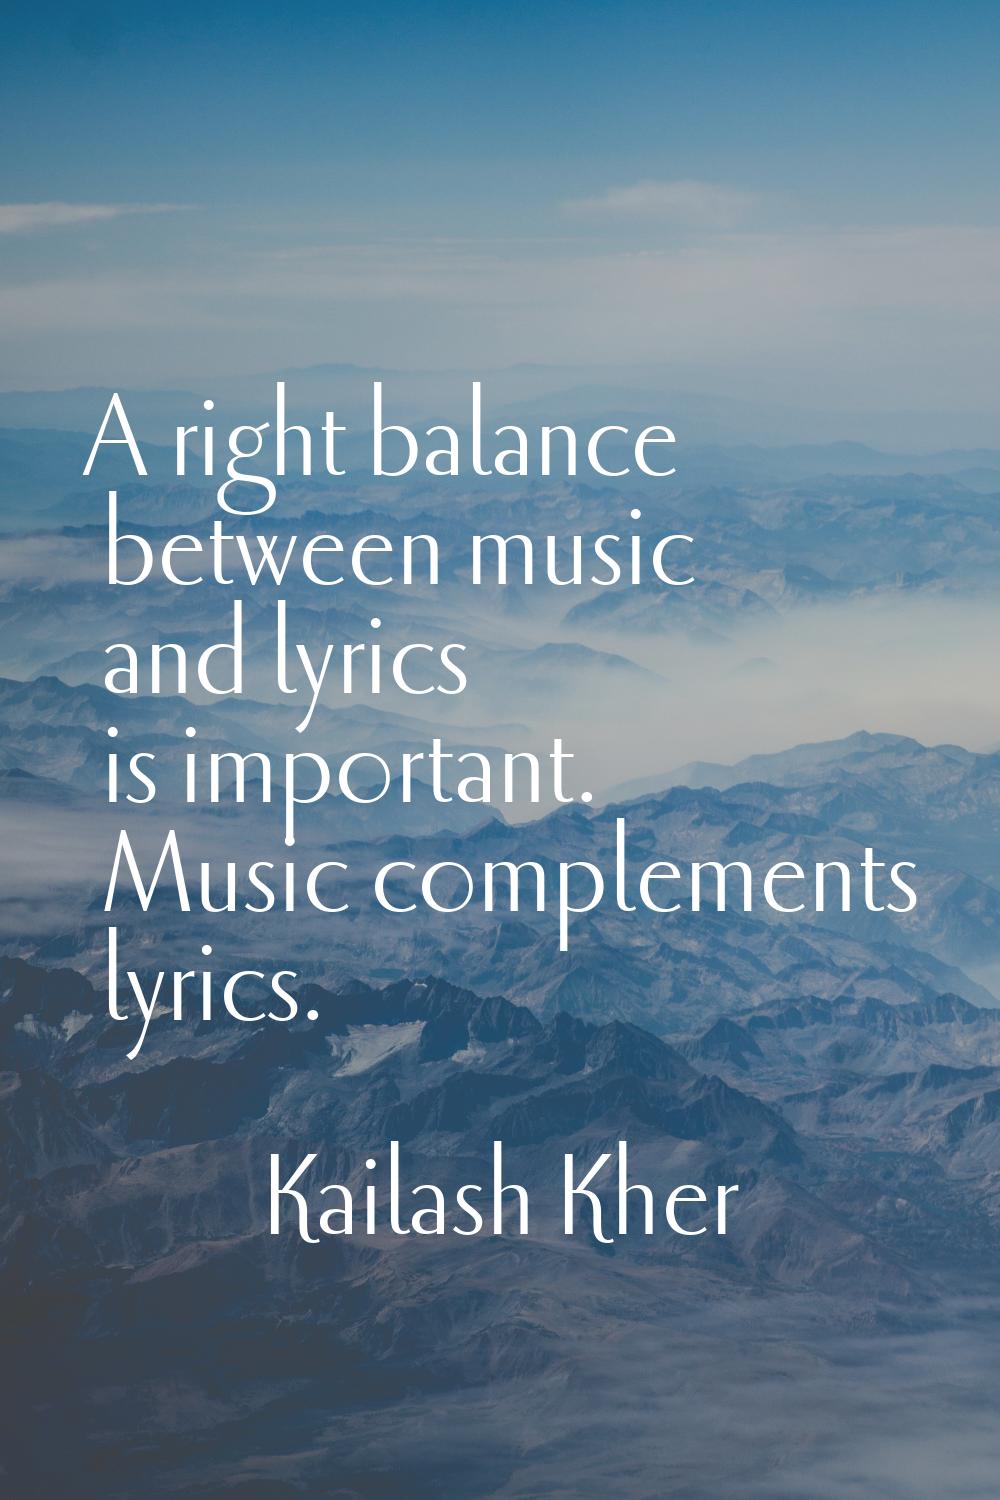 A right balance between music and lyrics is important. Music complements lyrics.